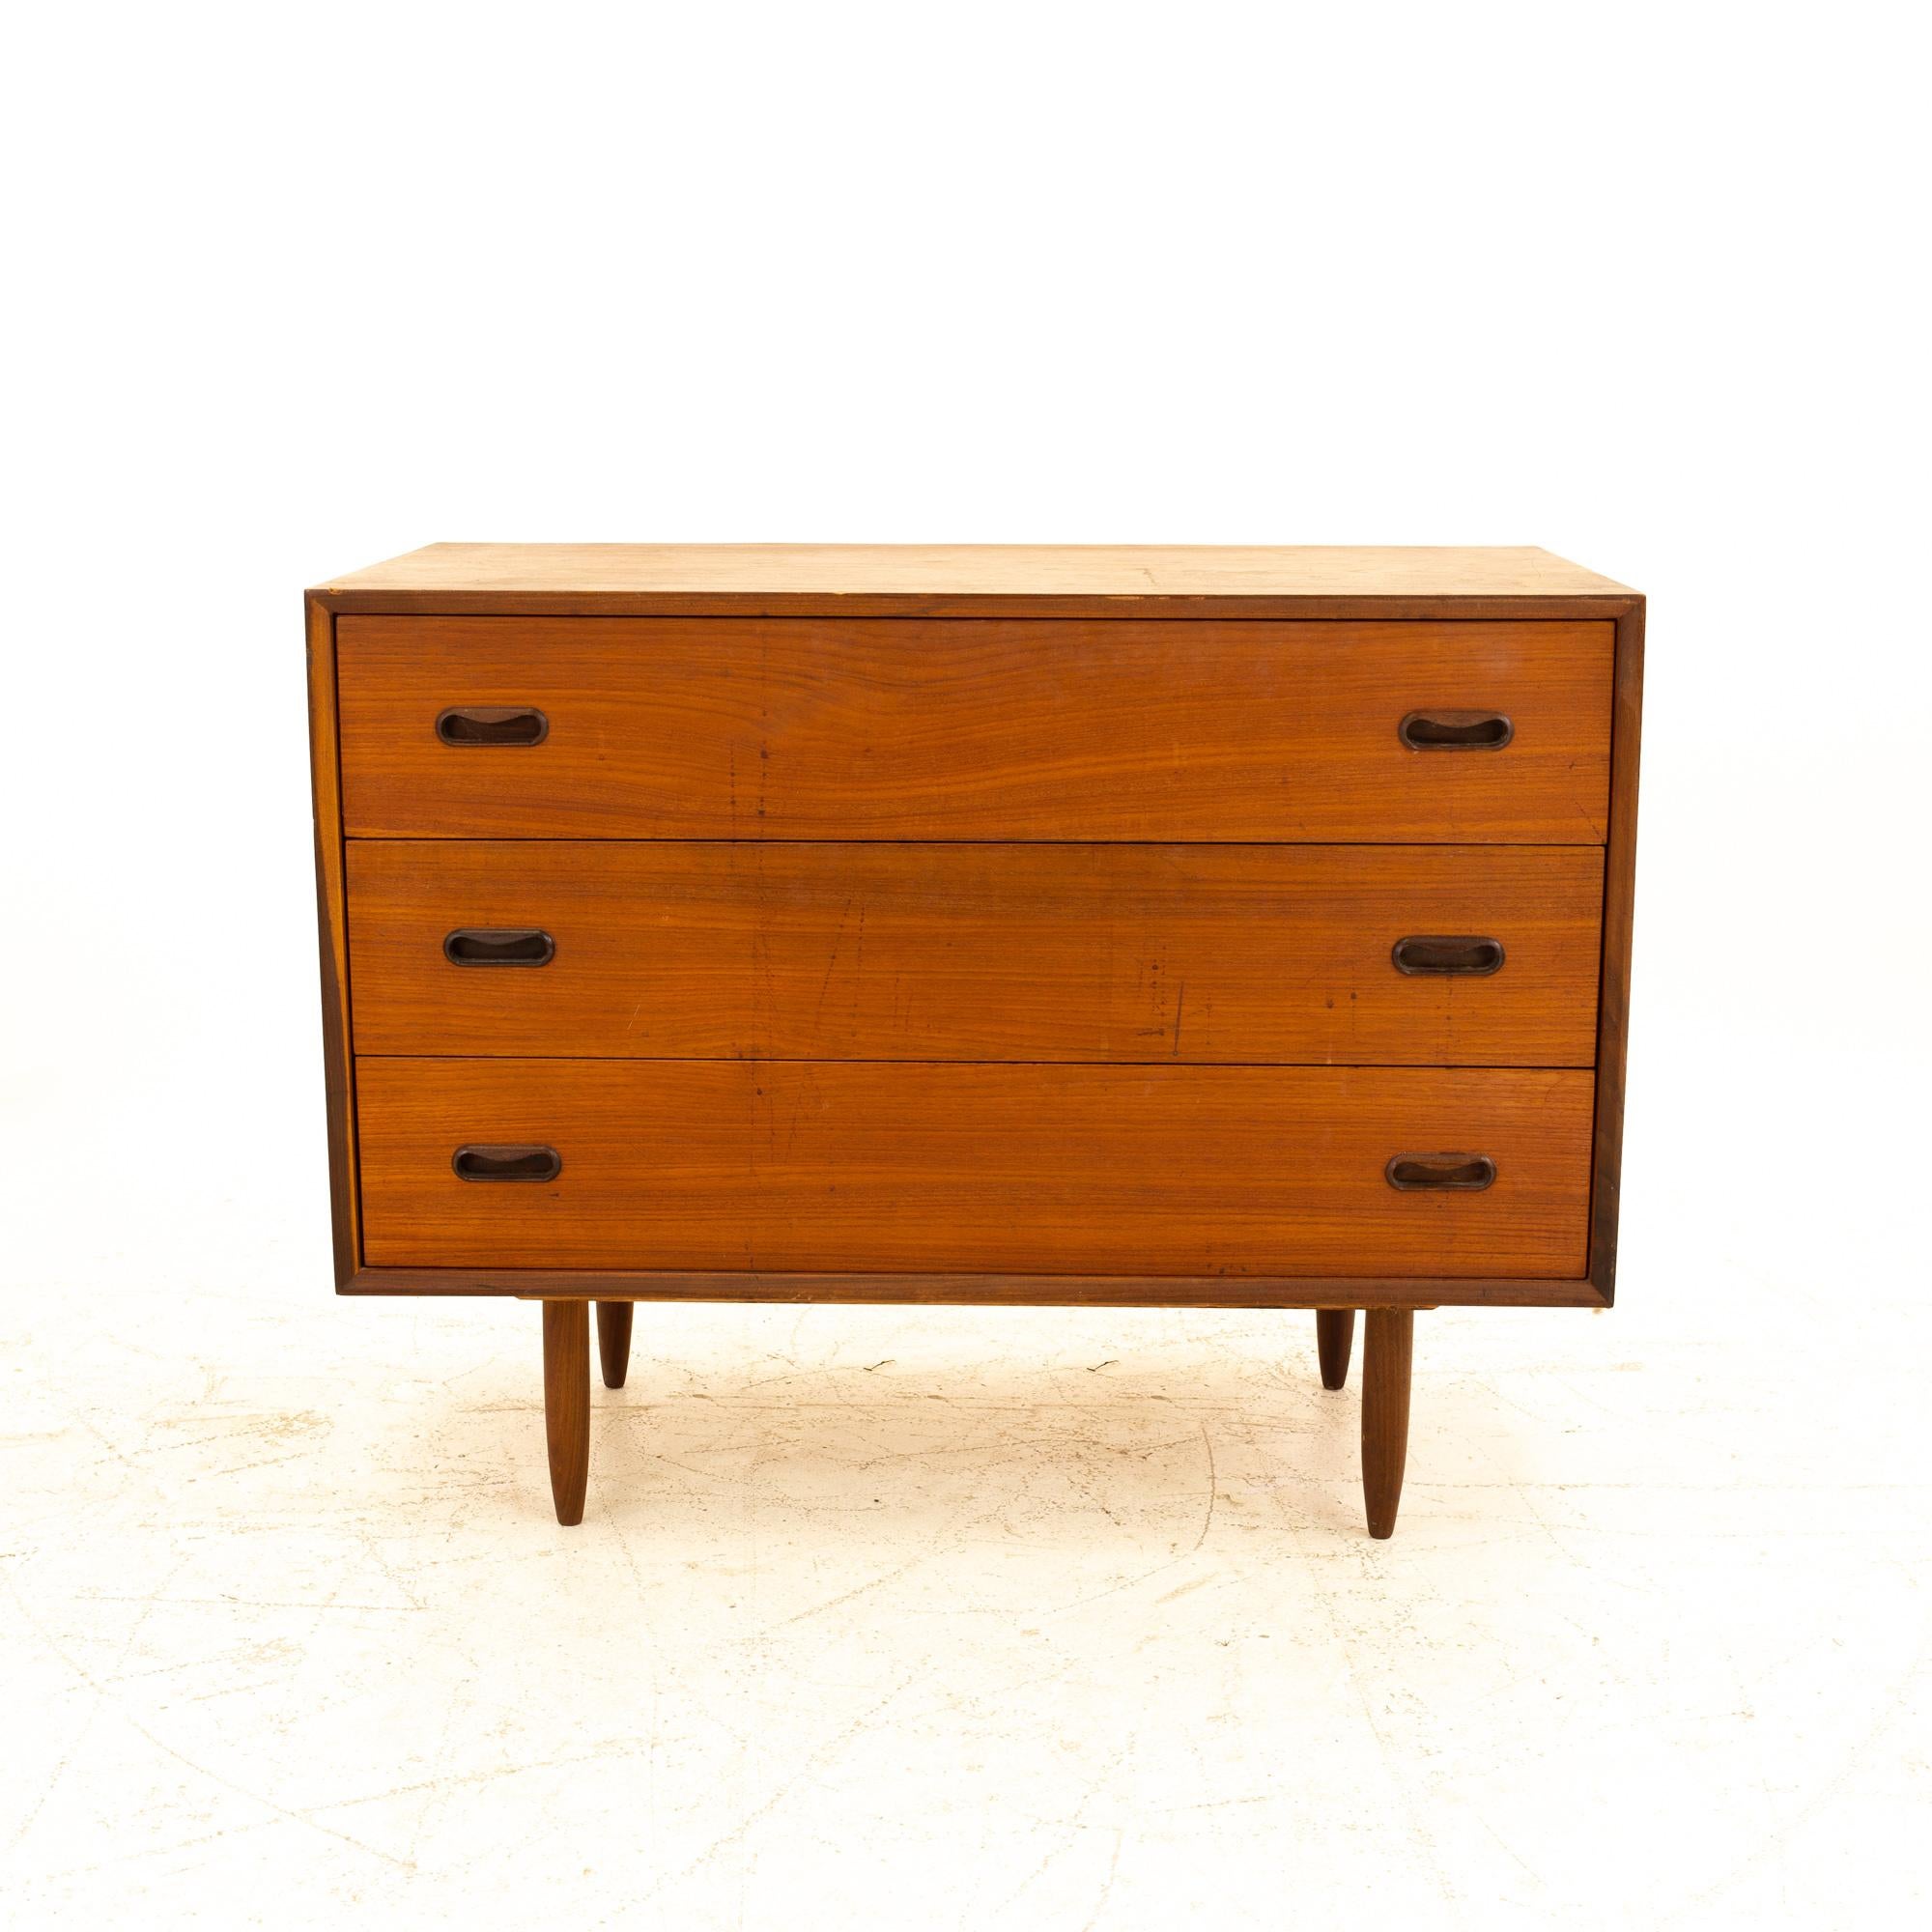 Peter Hvidt style Mid Century teak 3-drawer dresser chest of drawers

Dresser measures: 36 wide x 18 deep x 28 high

All pieces of furniture can be had in what we call restored vintage condition. That means the piece is restored upon purchase so